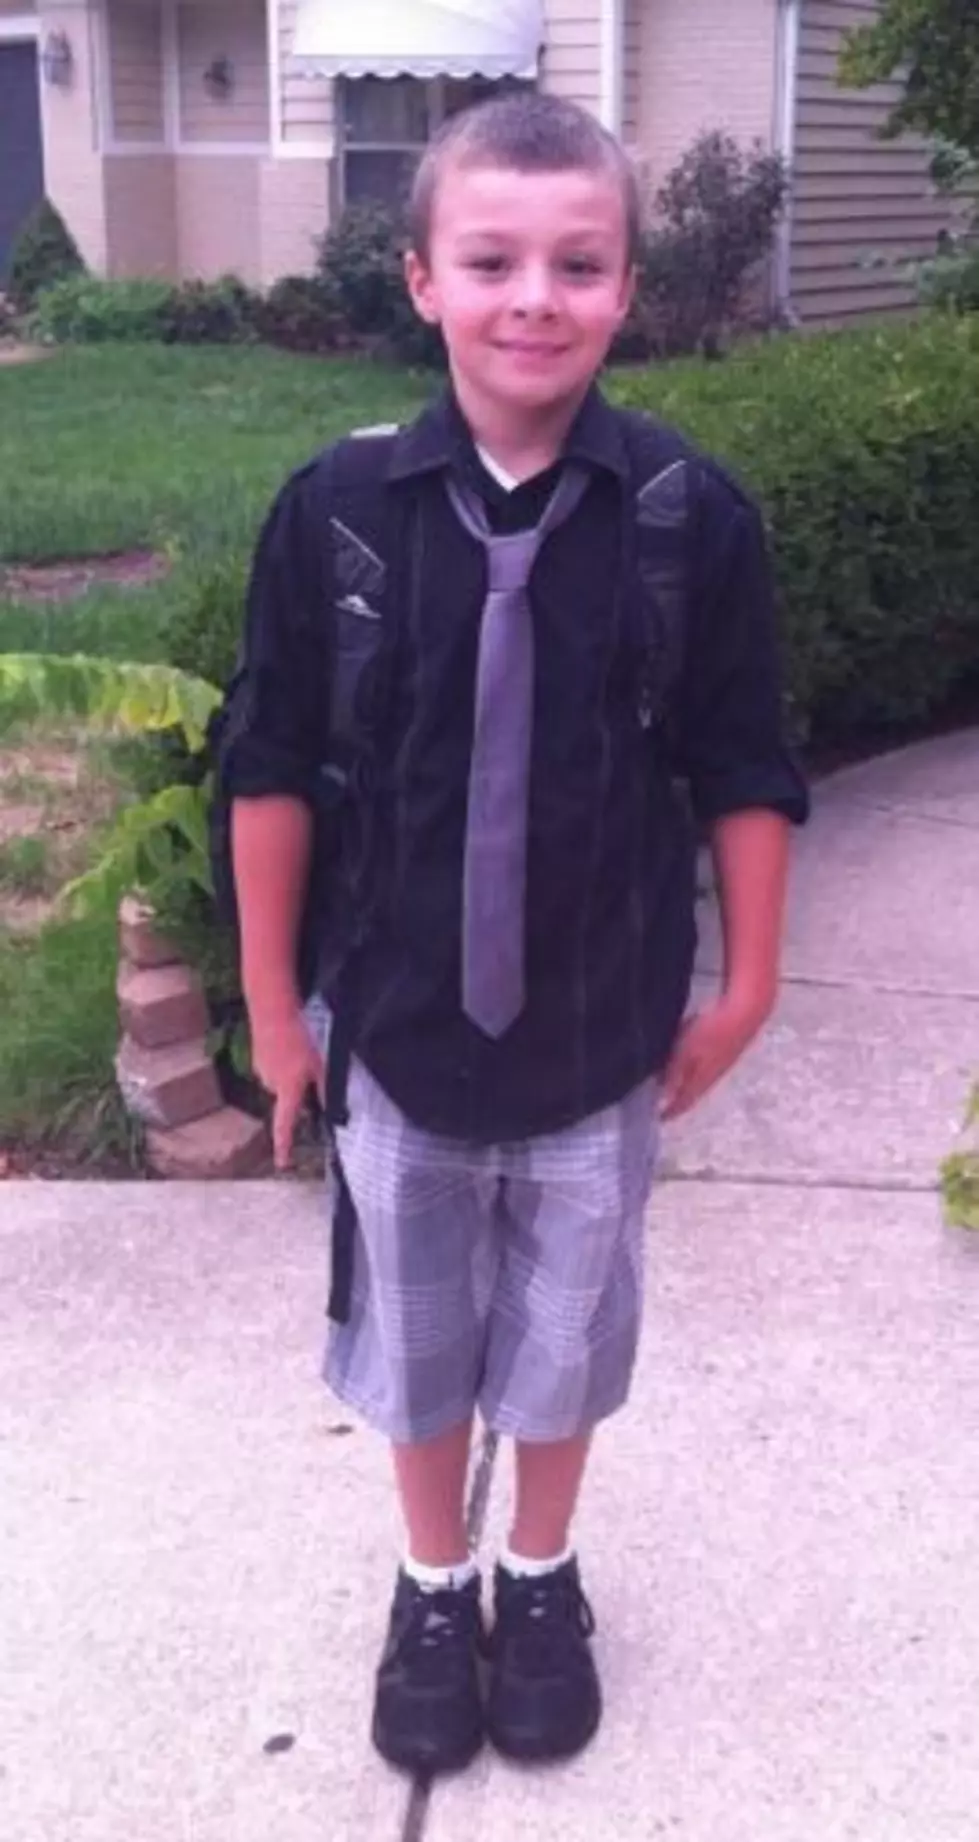 Share Your First Day of School Pictures